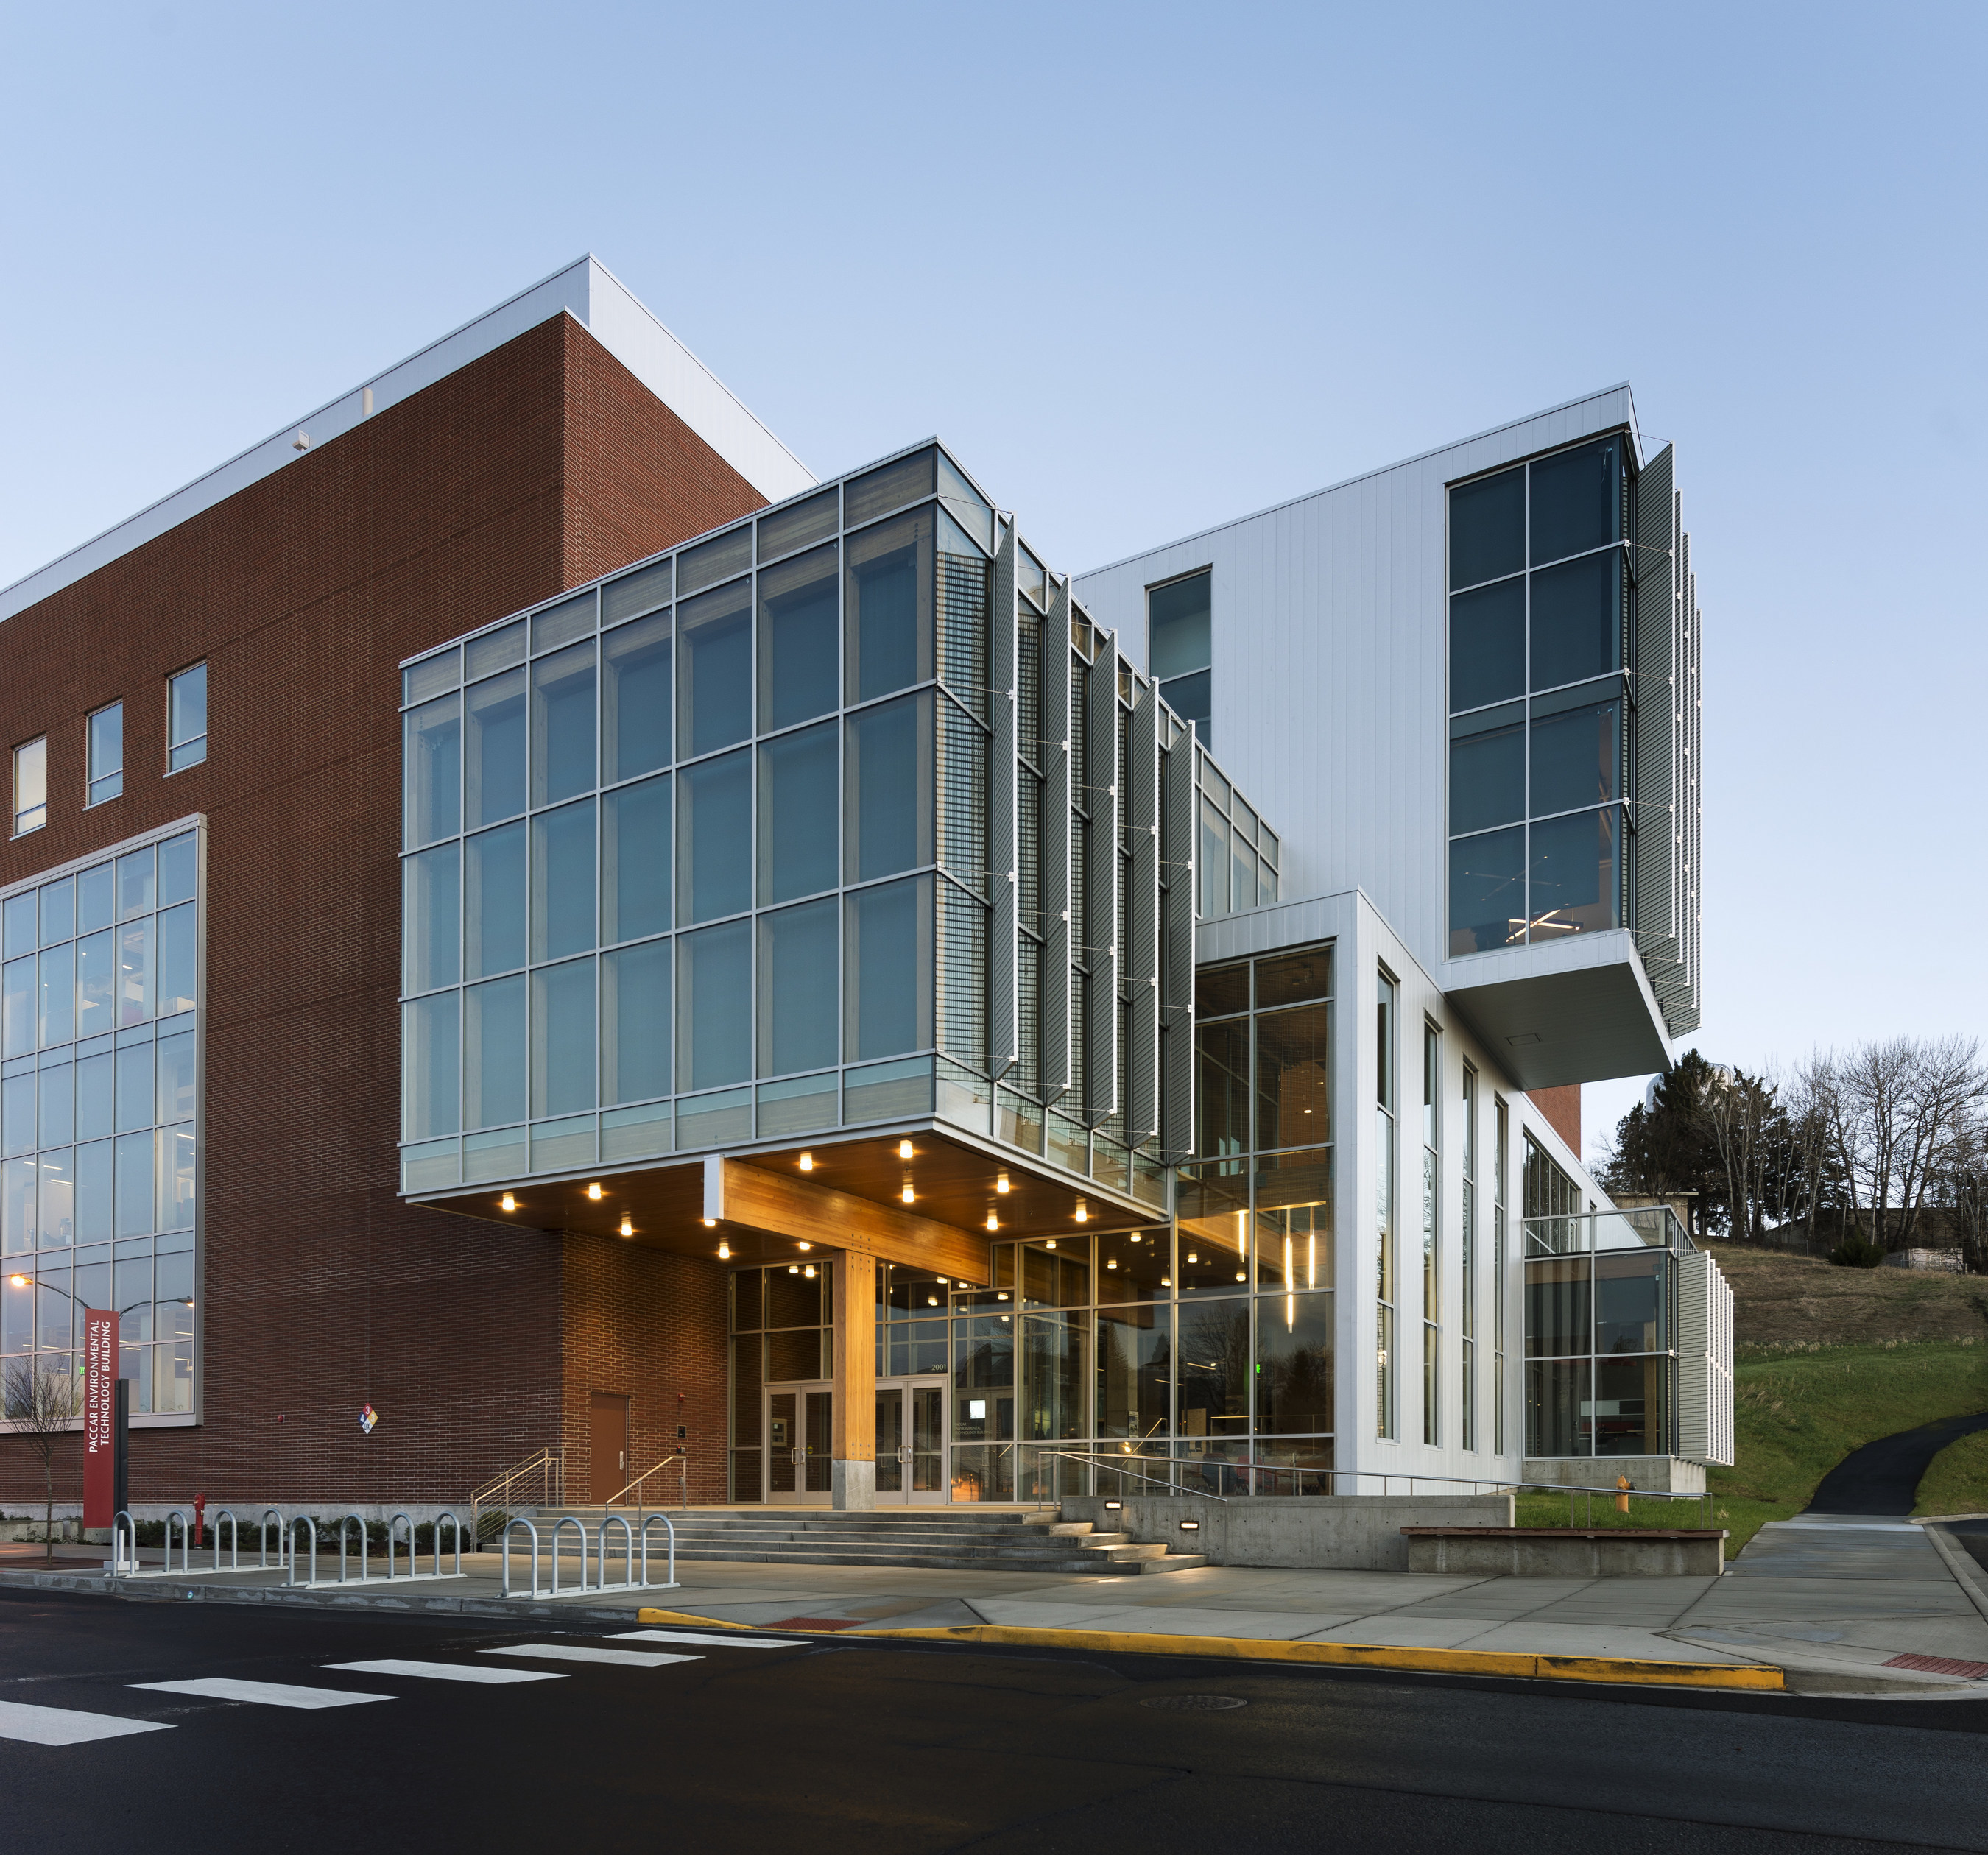 Exterior view of PACCAR Environmental Technology Building at Washington State University by LMN Architects. Image courtesy of LMN.